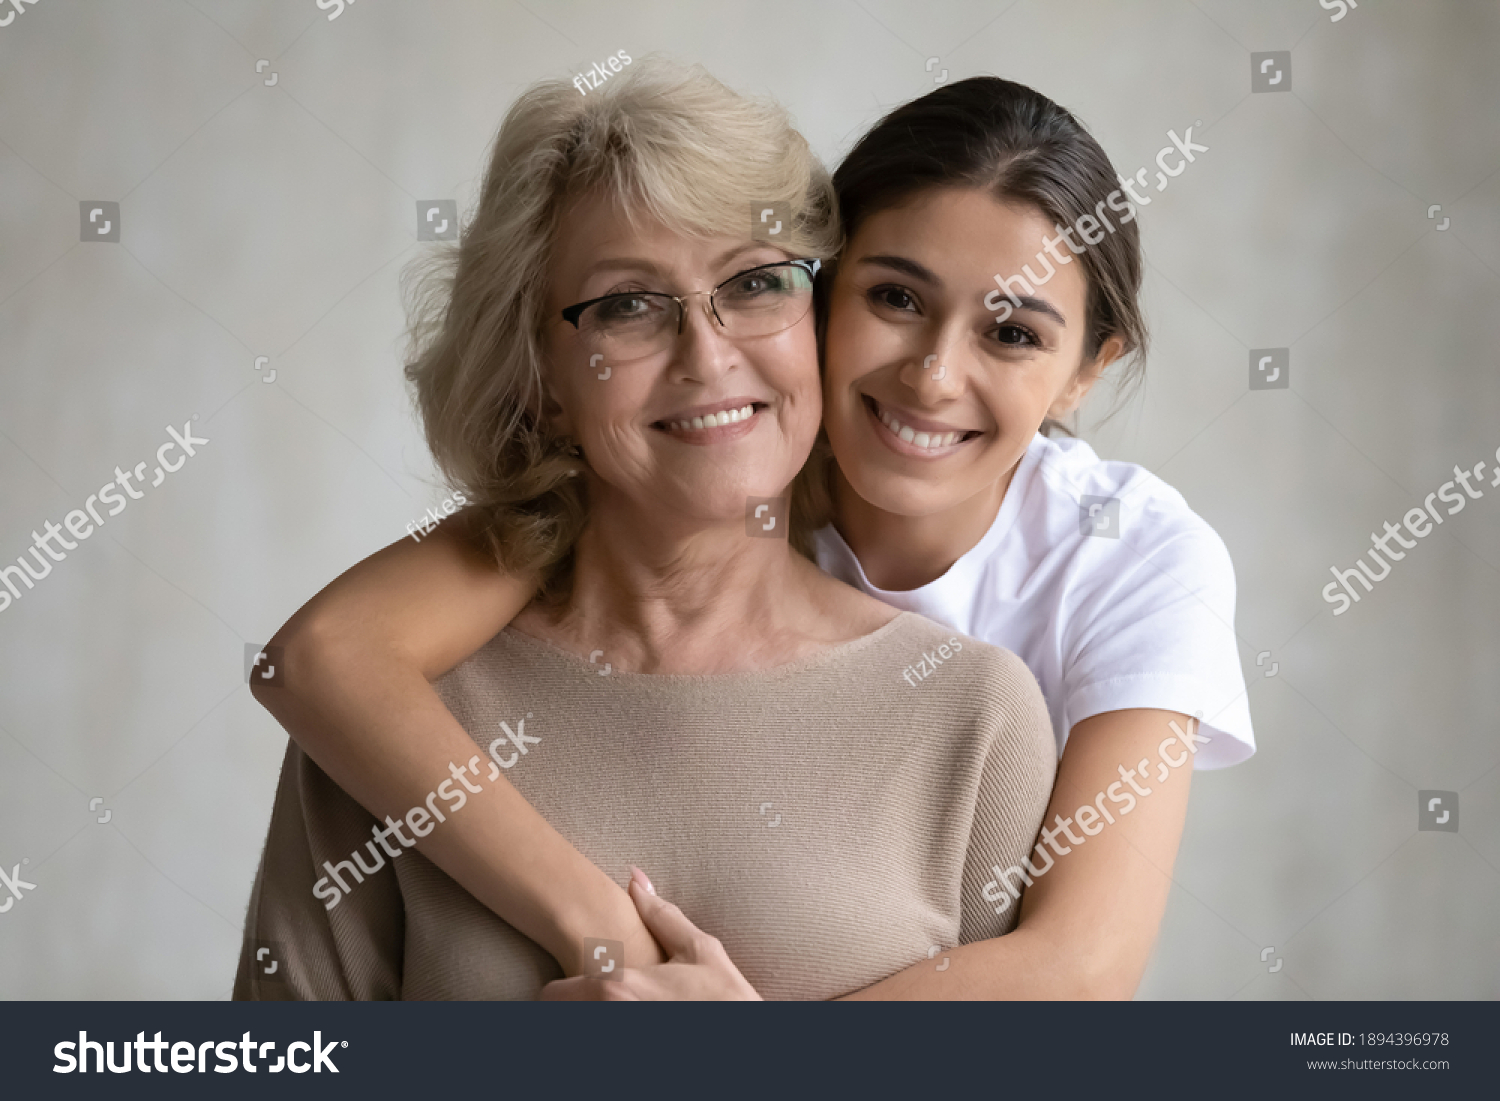 Head shot portrait loving grown up daughter hugging middle aged mother from back, looking at camera, happy mature grandmother and granddaughter posing for family photo on grey background together #1894396978